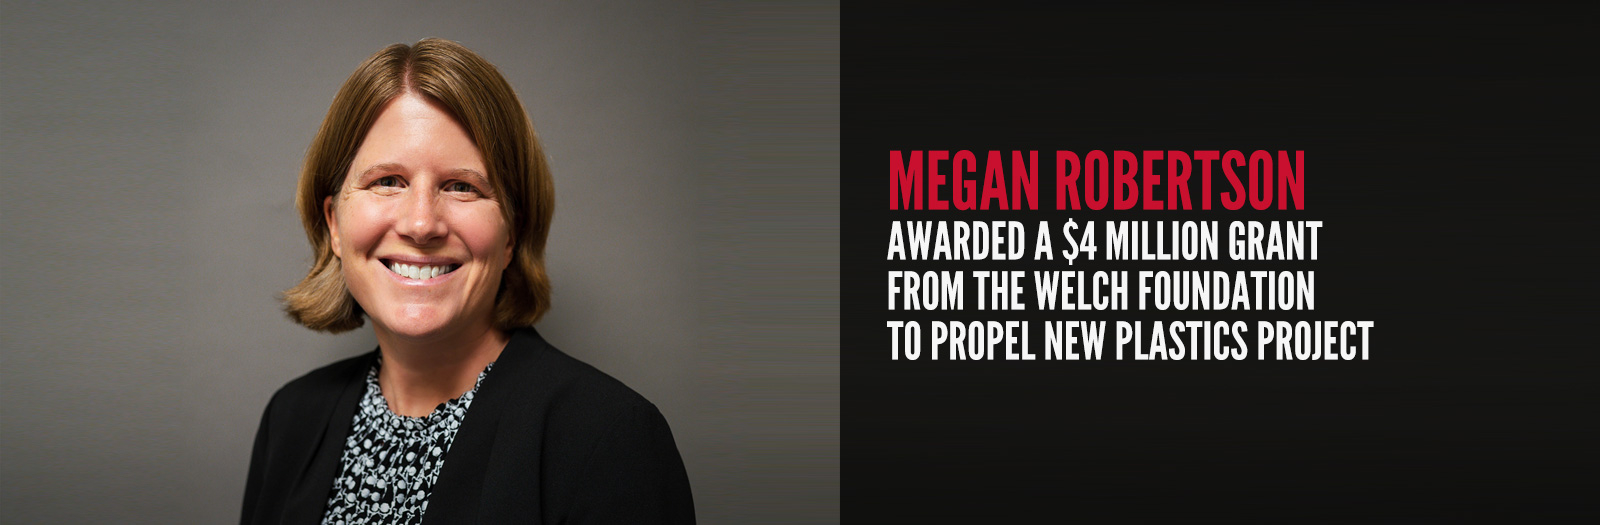 Megan Robertson Awarded A $4 Million Grant From the Welch Foundation To Propel New Plastics Project